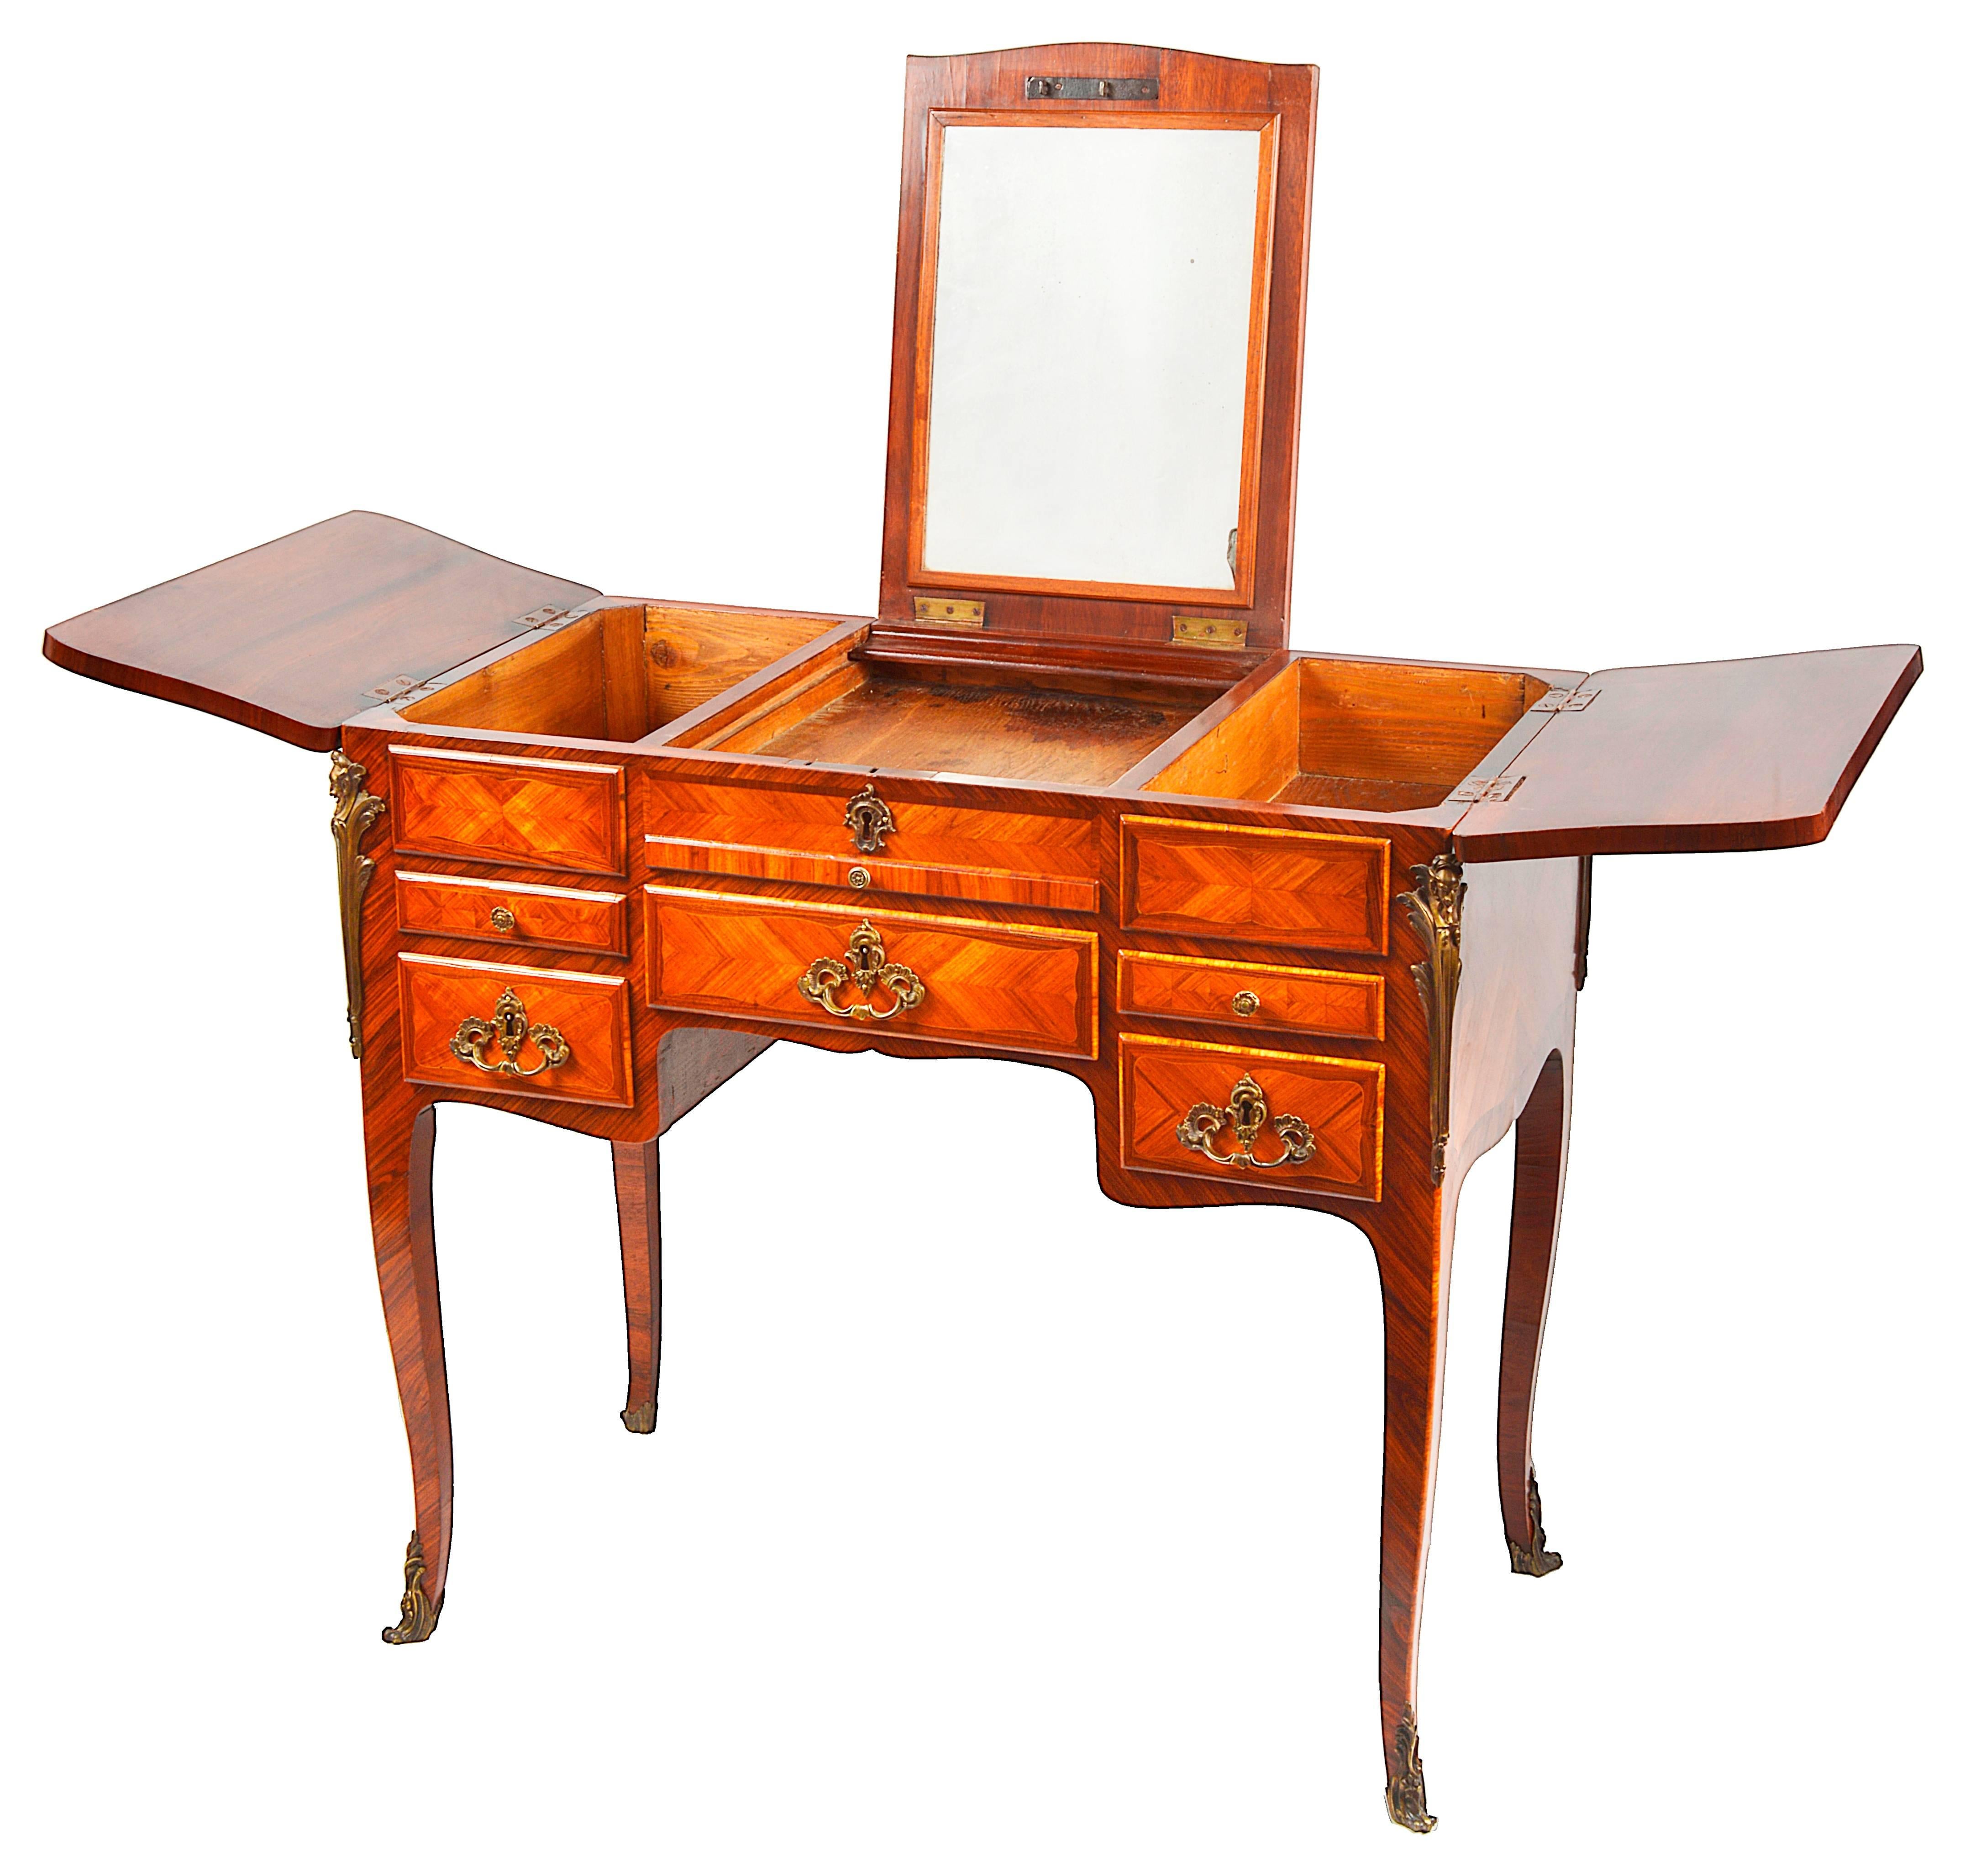 A good quality mid-19th century French King wood parquetry inlaid ladies dressing table. The top hinging open to reveal a mirror in the centre section, the two sides open to reveal compartments, drawers and a writing slide beneath. Ormolu mounts and